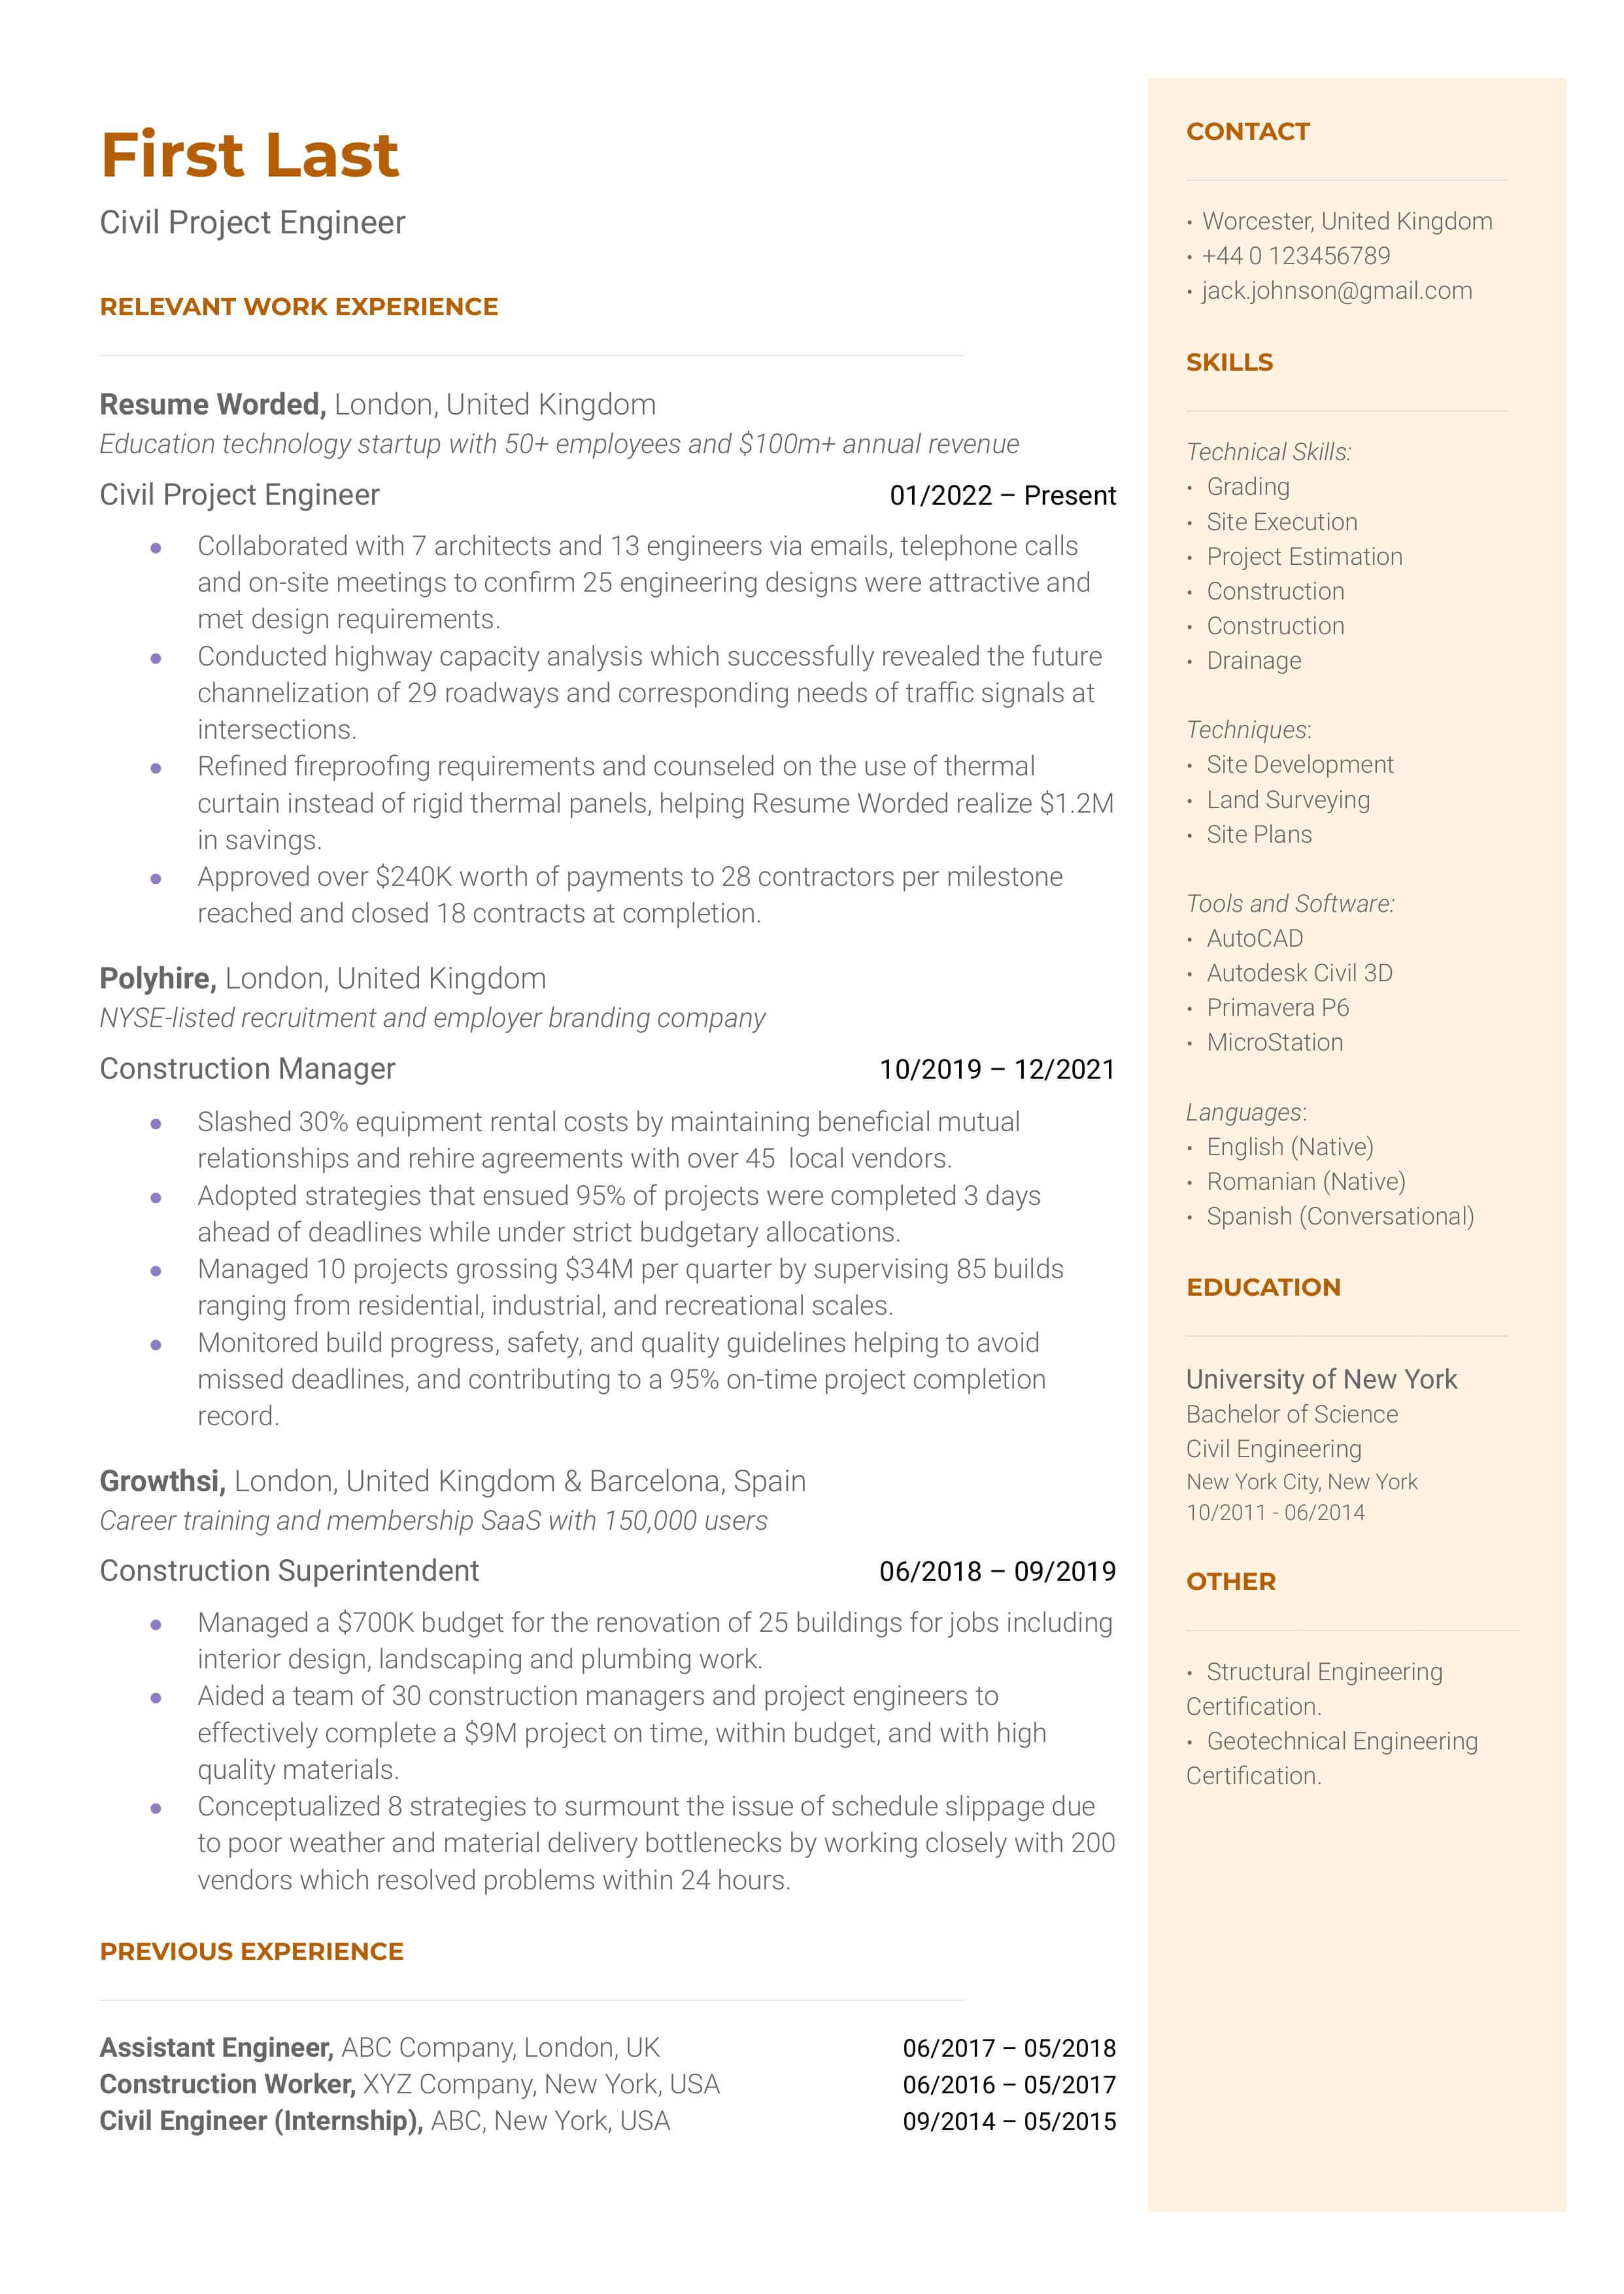 Civil Project Engineer Resume Template + Example